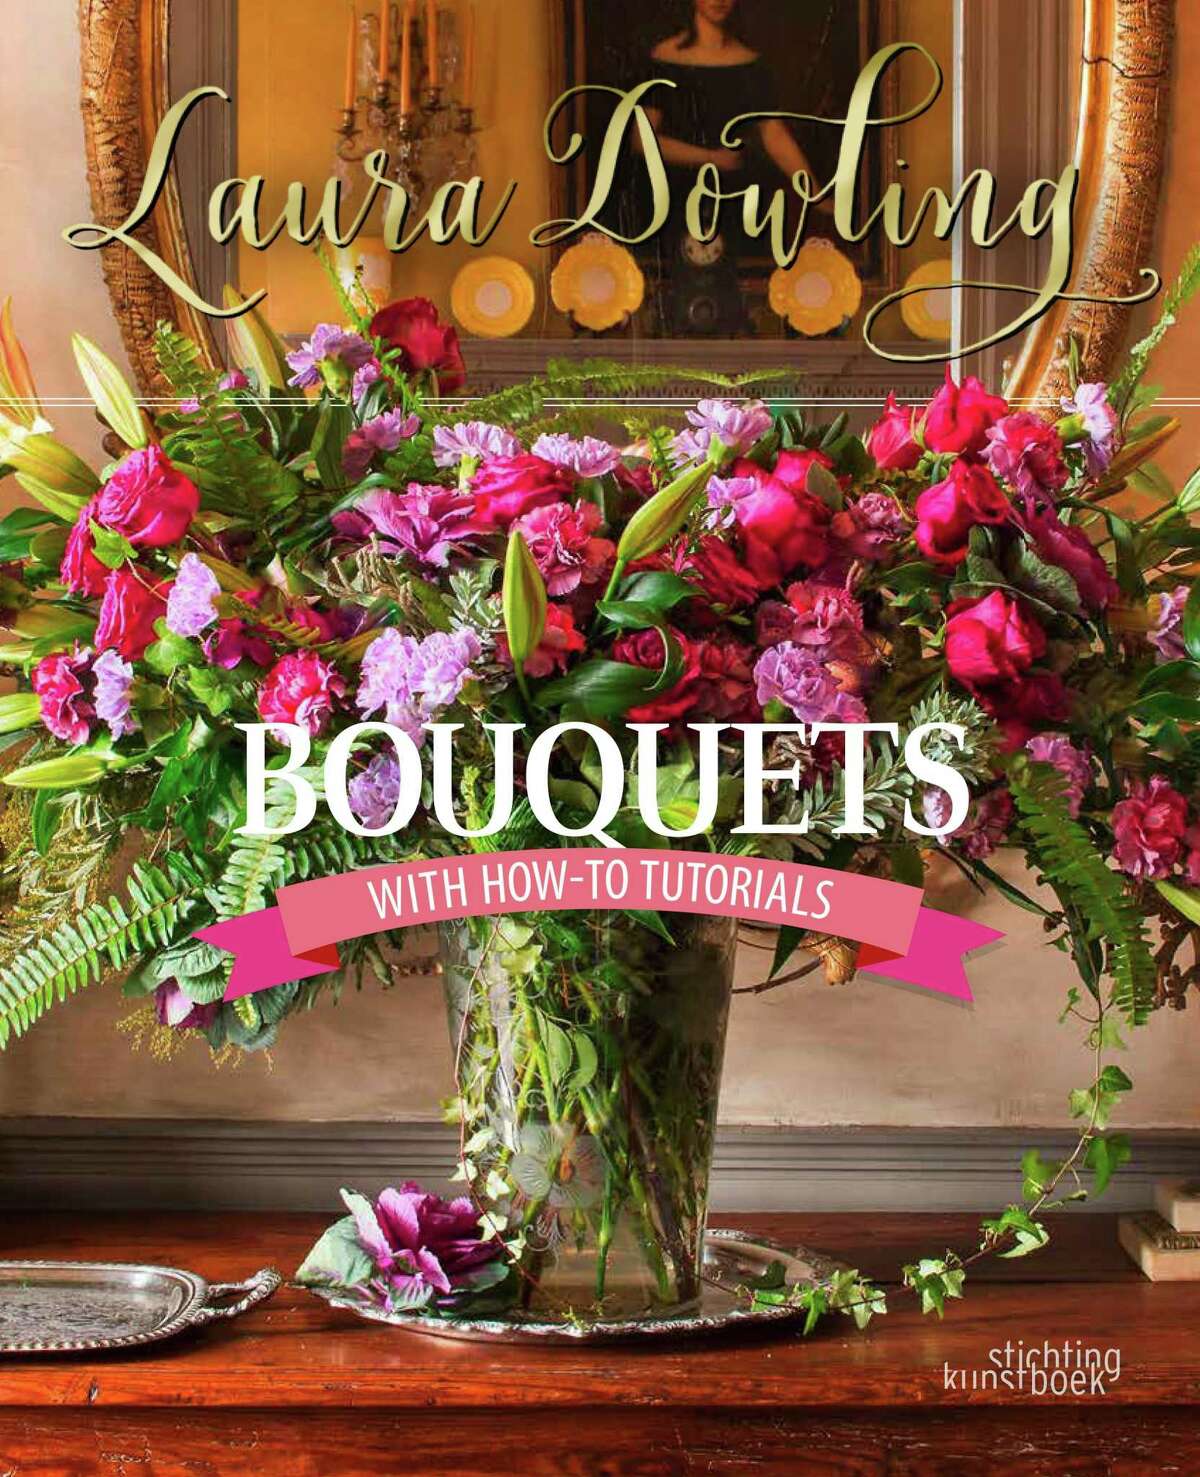 Laura Dowling's new book, "Bouquets." (Stichting Kunstboak; $35; 144 pp.)